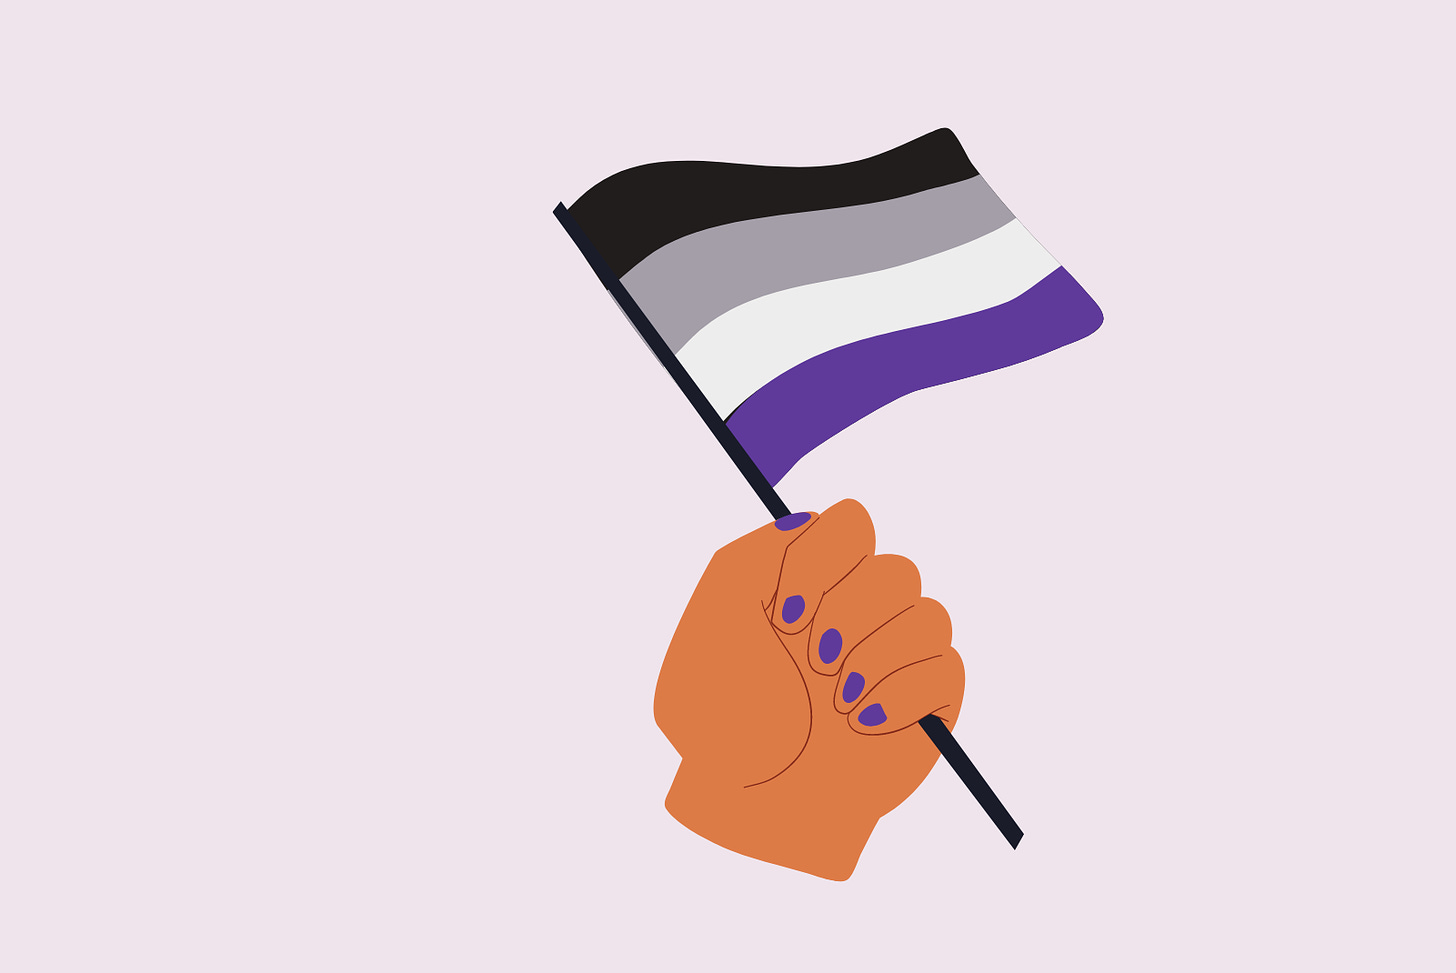 A graphic of a hand with purple nail polish holding an ace pride flag.